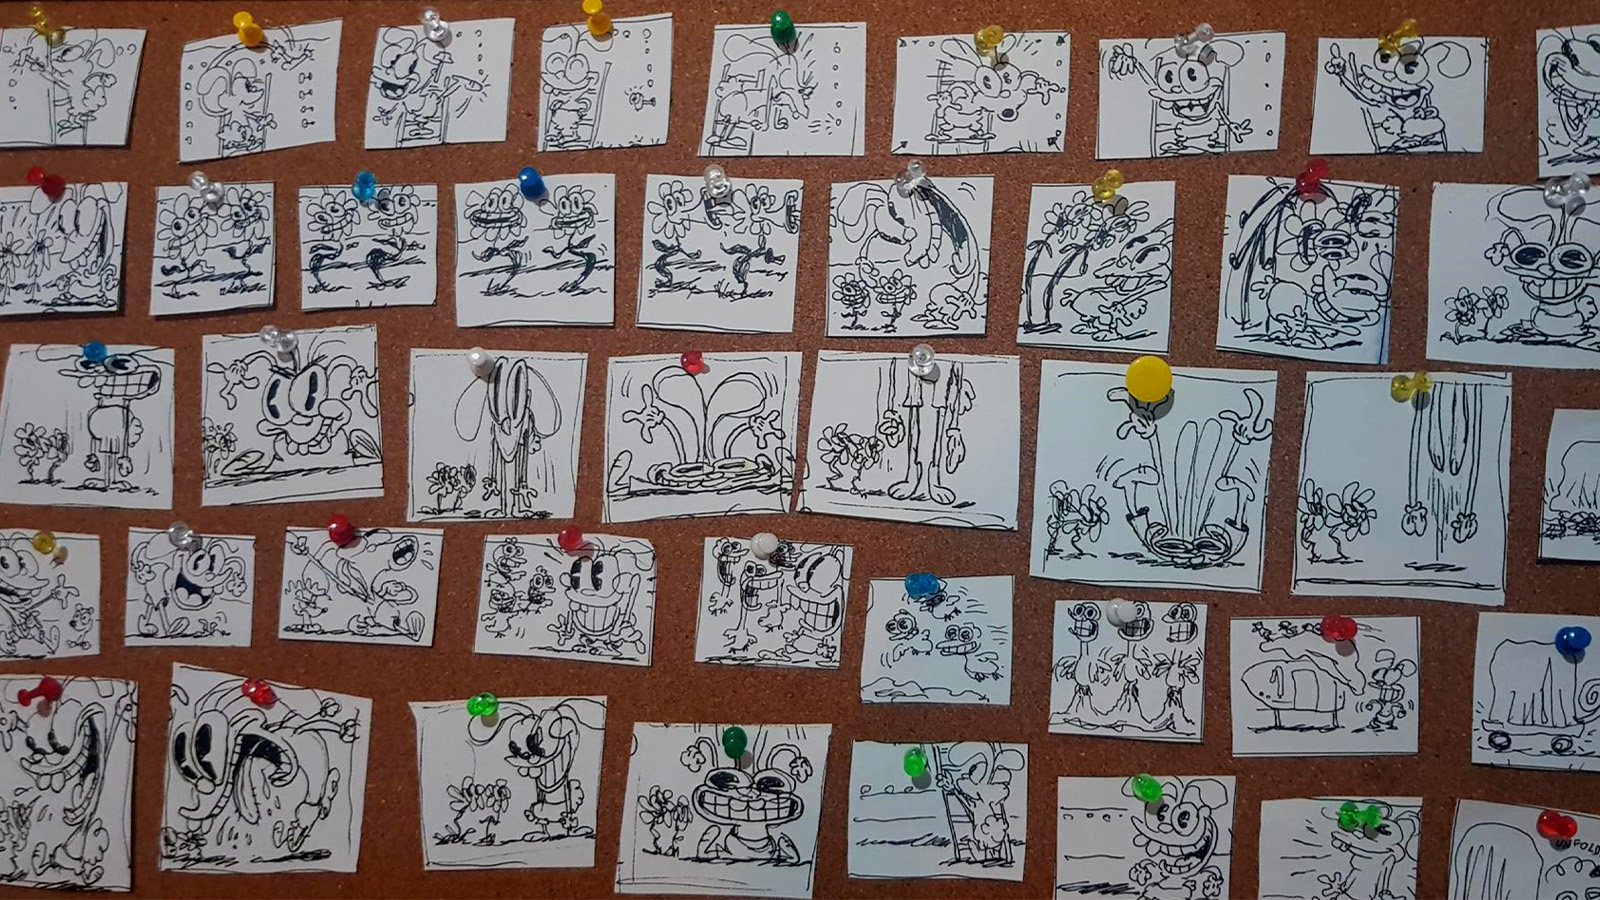 Storyboard artwork of a scene from the animation